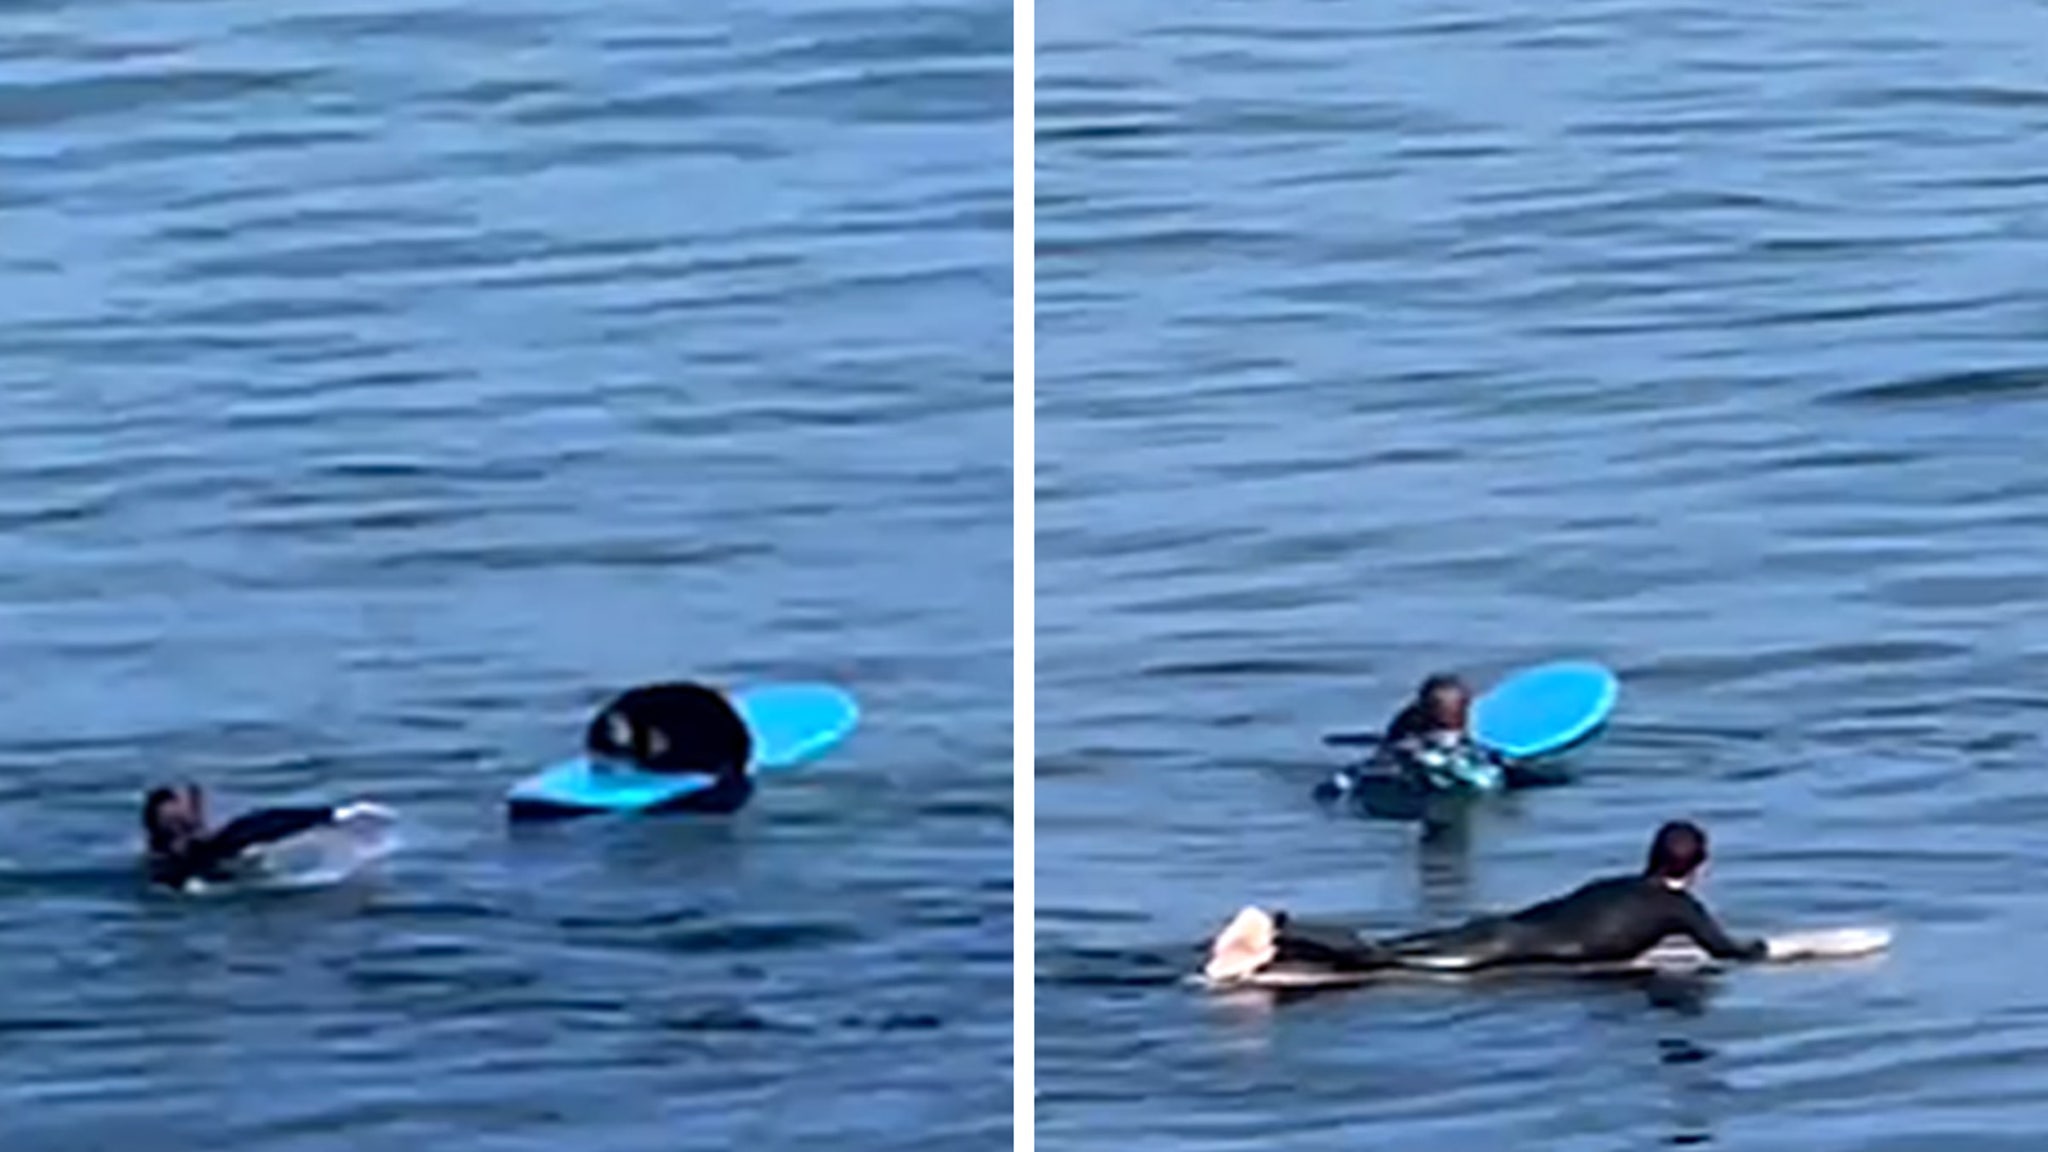 California surfer finds himself in a wild stalemate with a sea otter at sea